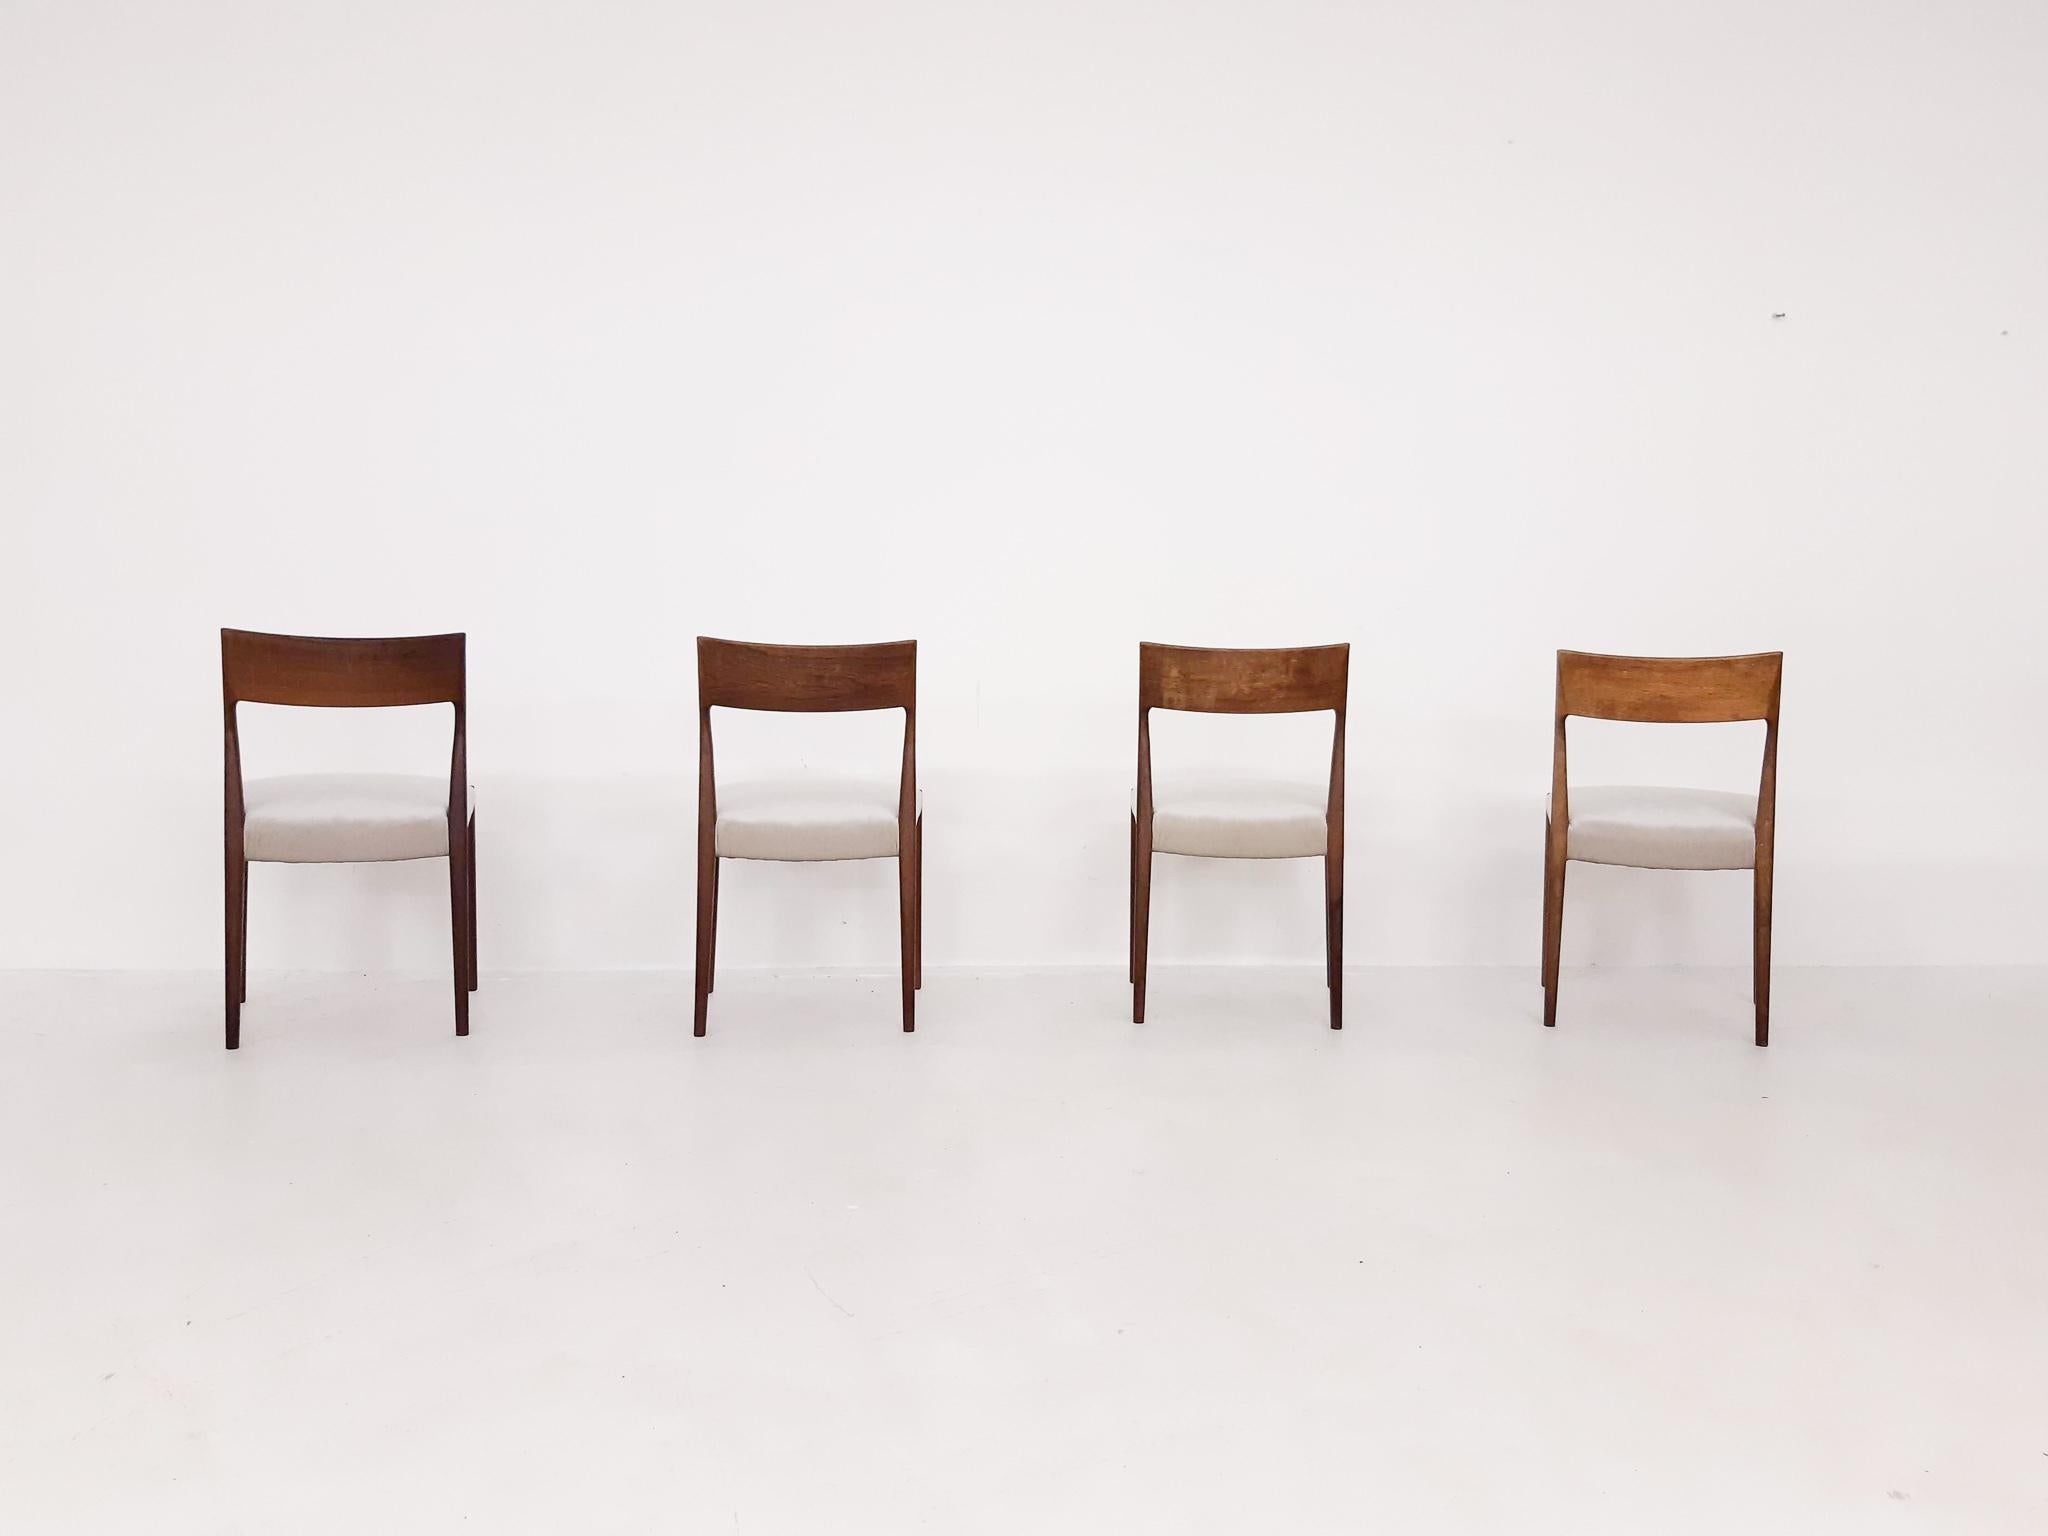 Dutch Set of 4 Rosewood Dining Chairs by Fristho, the Netherlands, 1960s